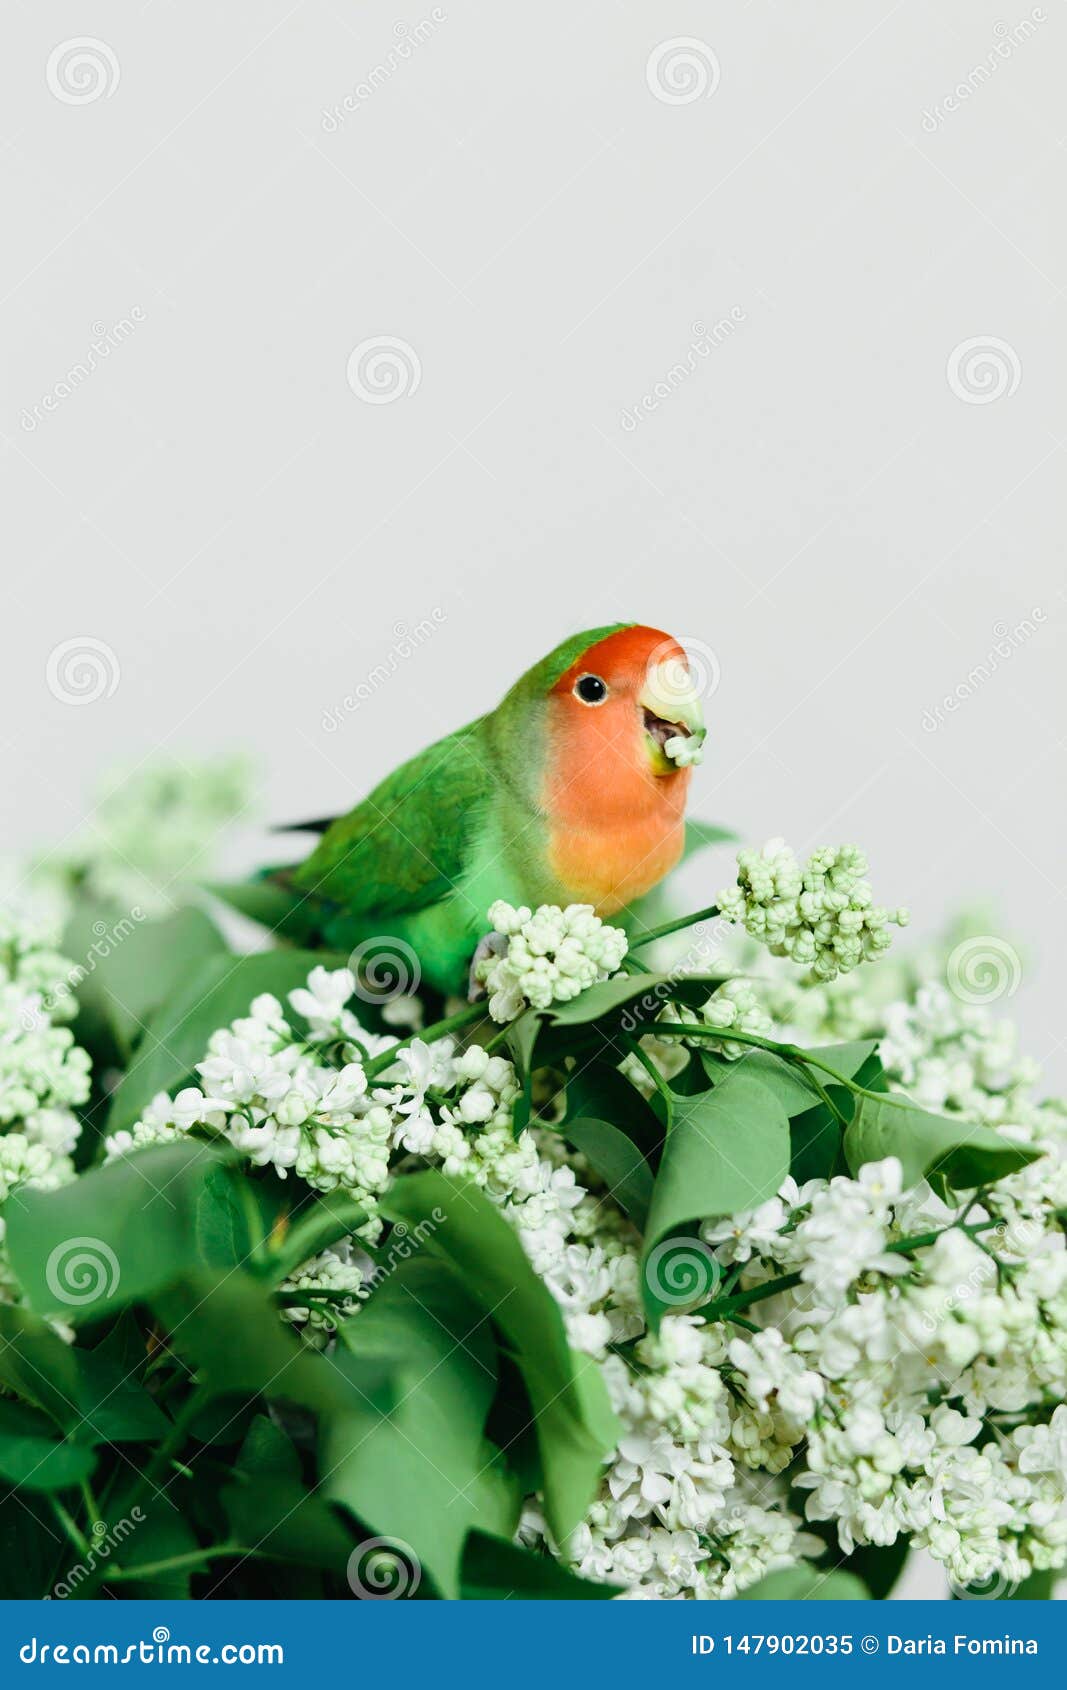 Cute Parrot Lovebirds Sitting on a Bouquet of Lilac Stock Image ...